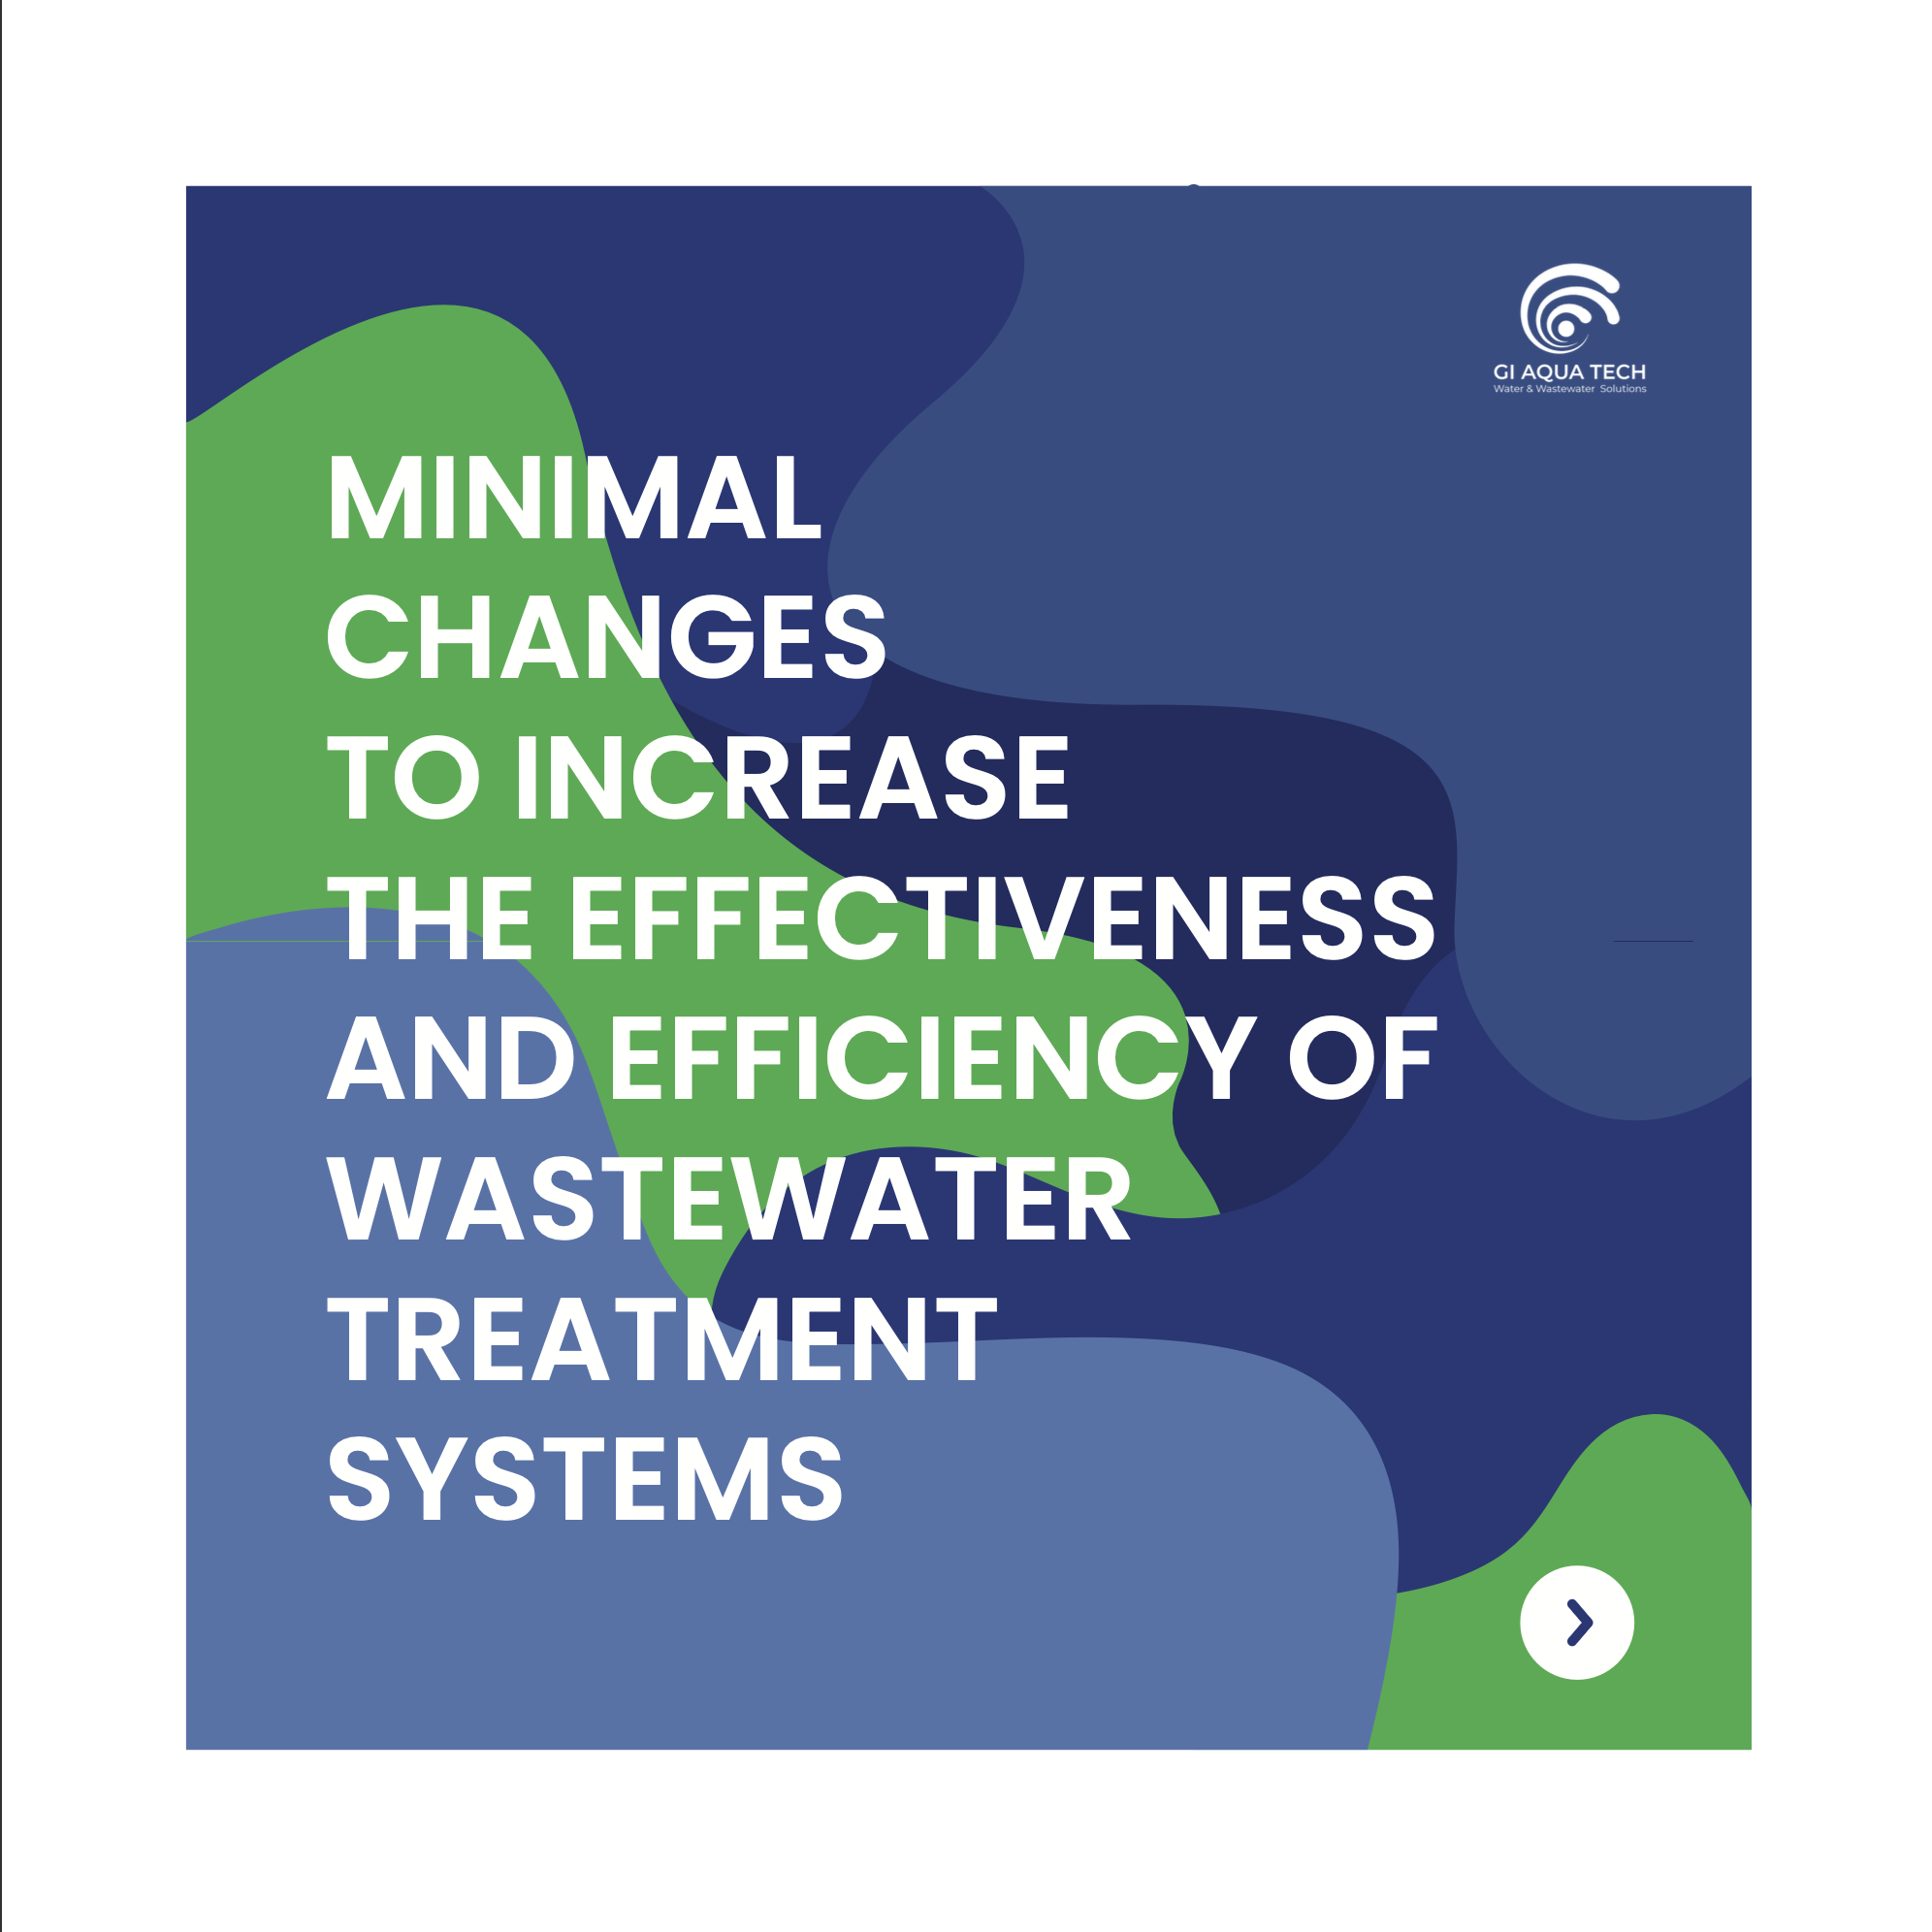 3 minimal changes to ıncrease the effectiveness and efficiency of wastewater treatment systems